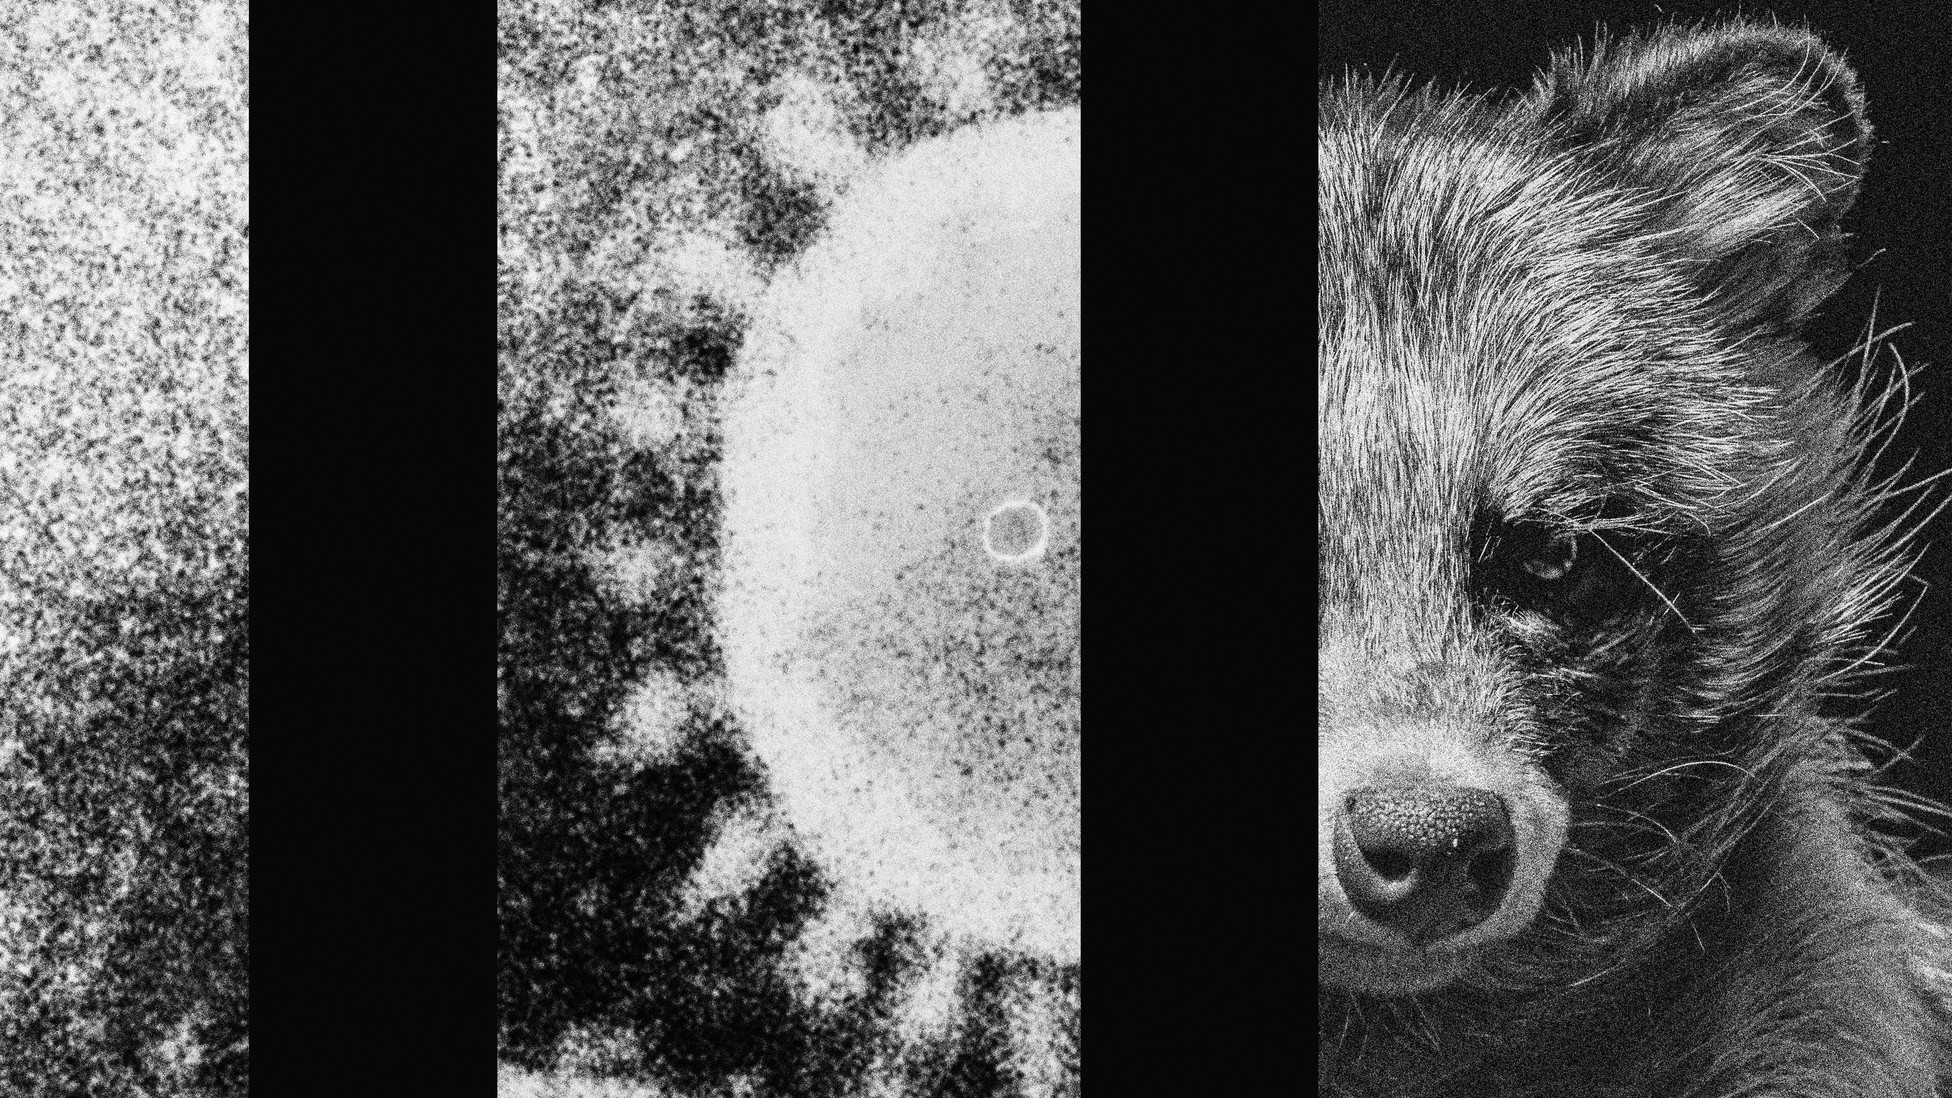 The Strongest Evidence Yet That an Animal Started the Pandemic (theatlantic.com)